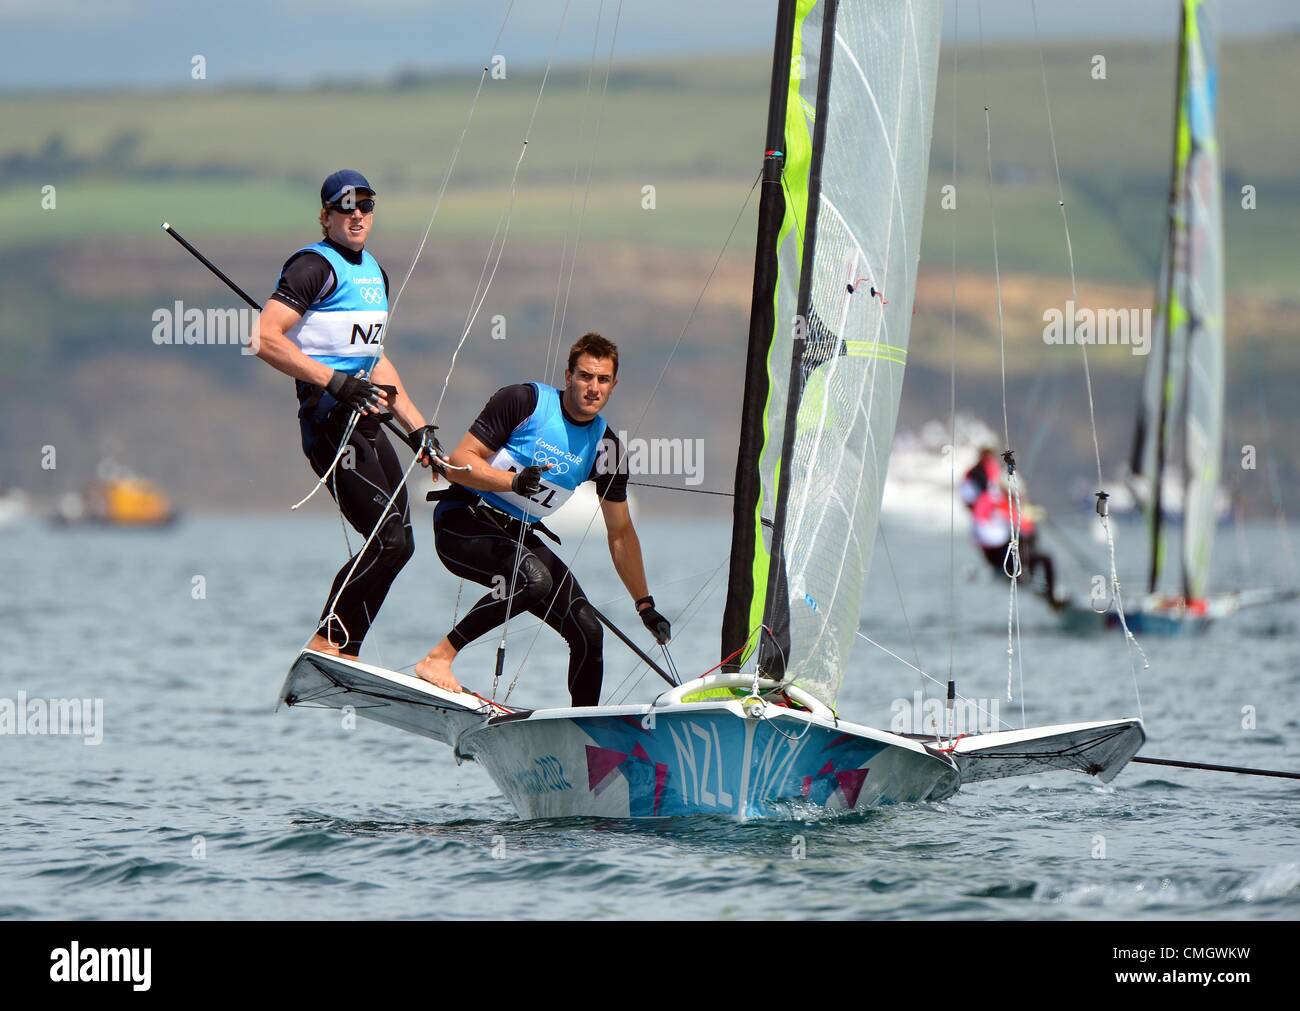 Olympic Sailing, action during the London 2012 Olympic Games at the Weymouth & Portland Venue, Dorset, Britain, UK.  Peter Burling and Blair Tuke of New Zealand win silver in the 49er Men's skiff medal race August 8th, 2012 Stock Photo